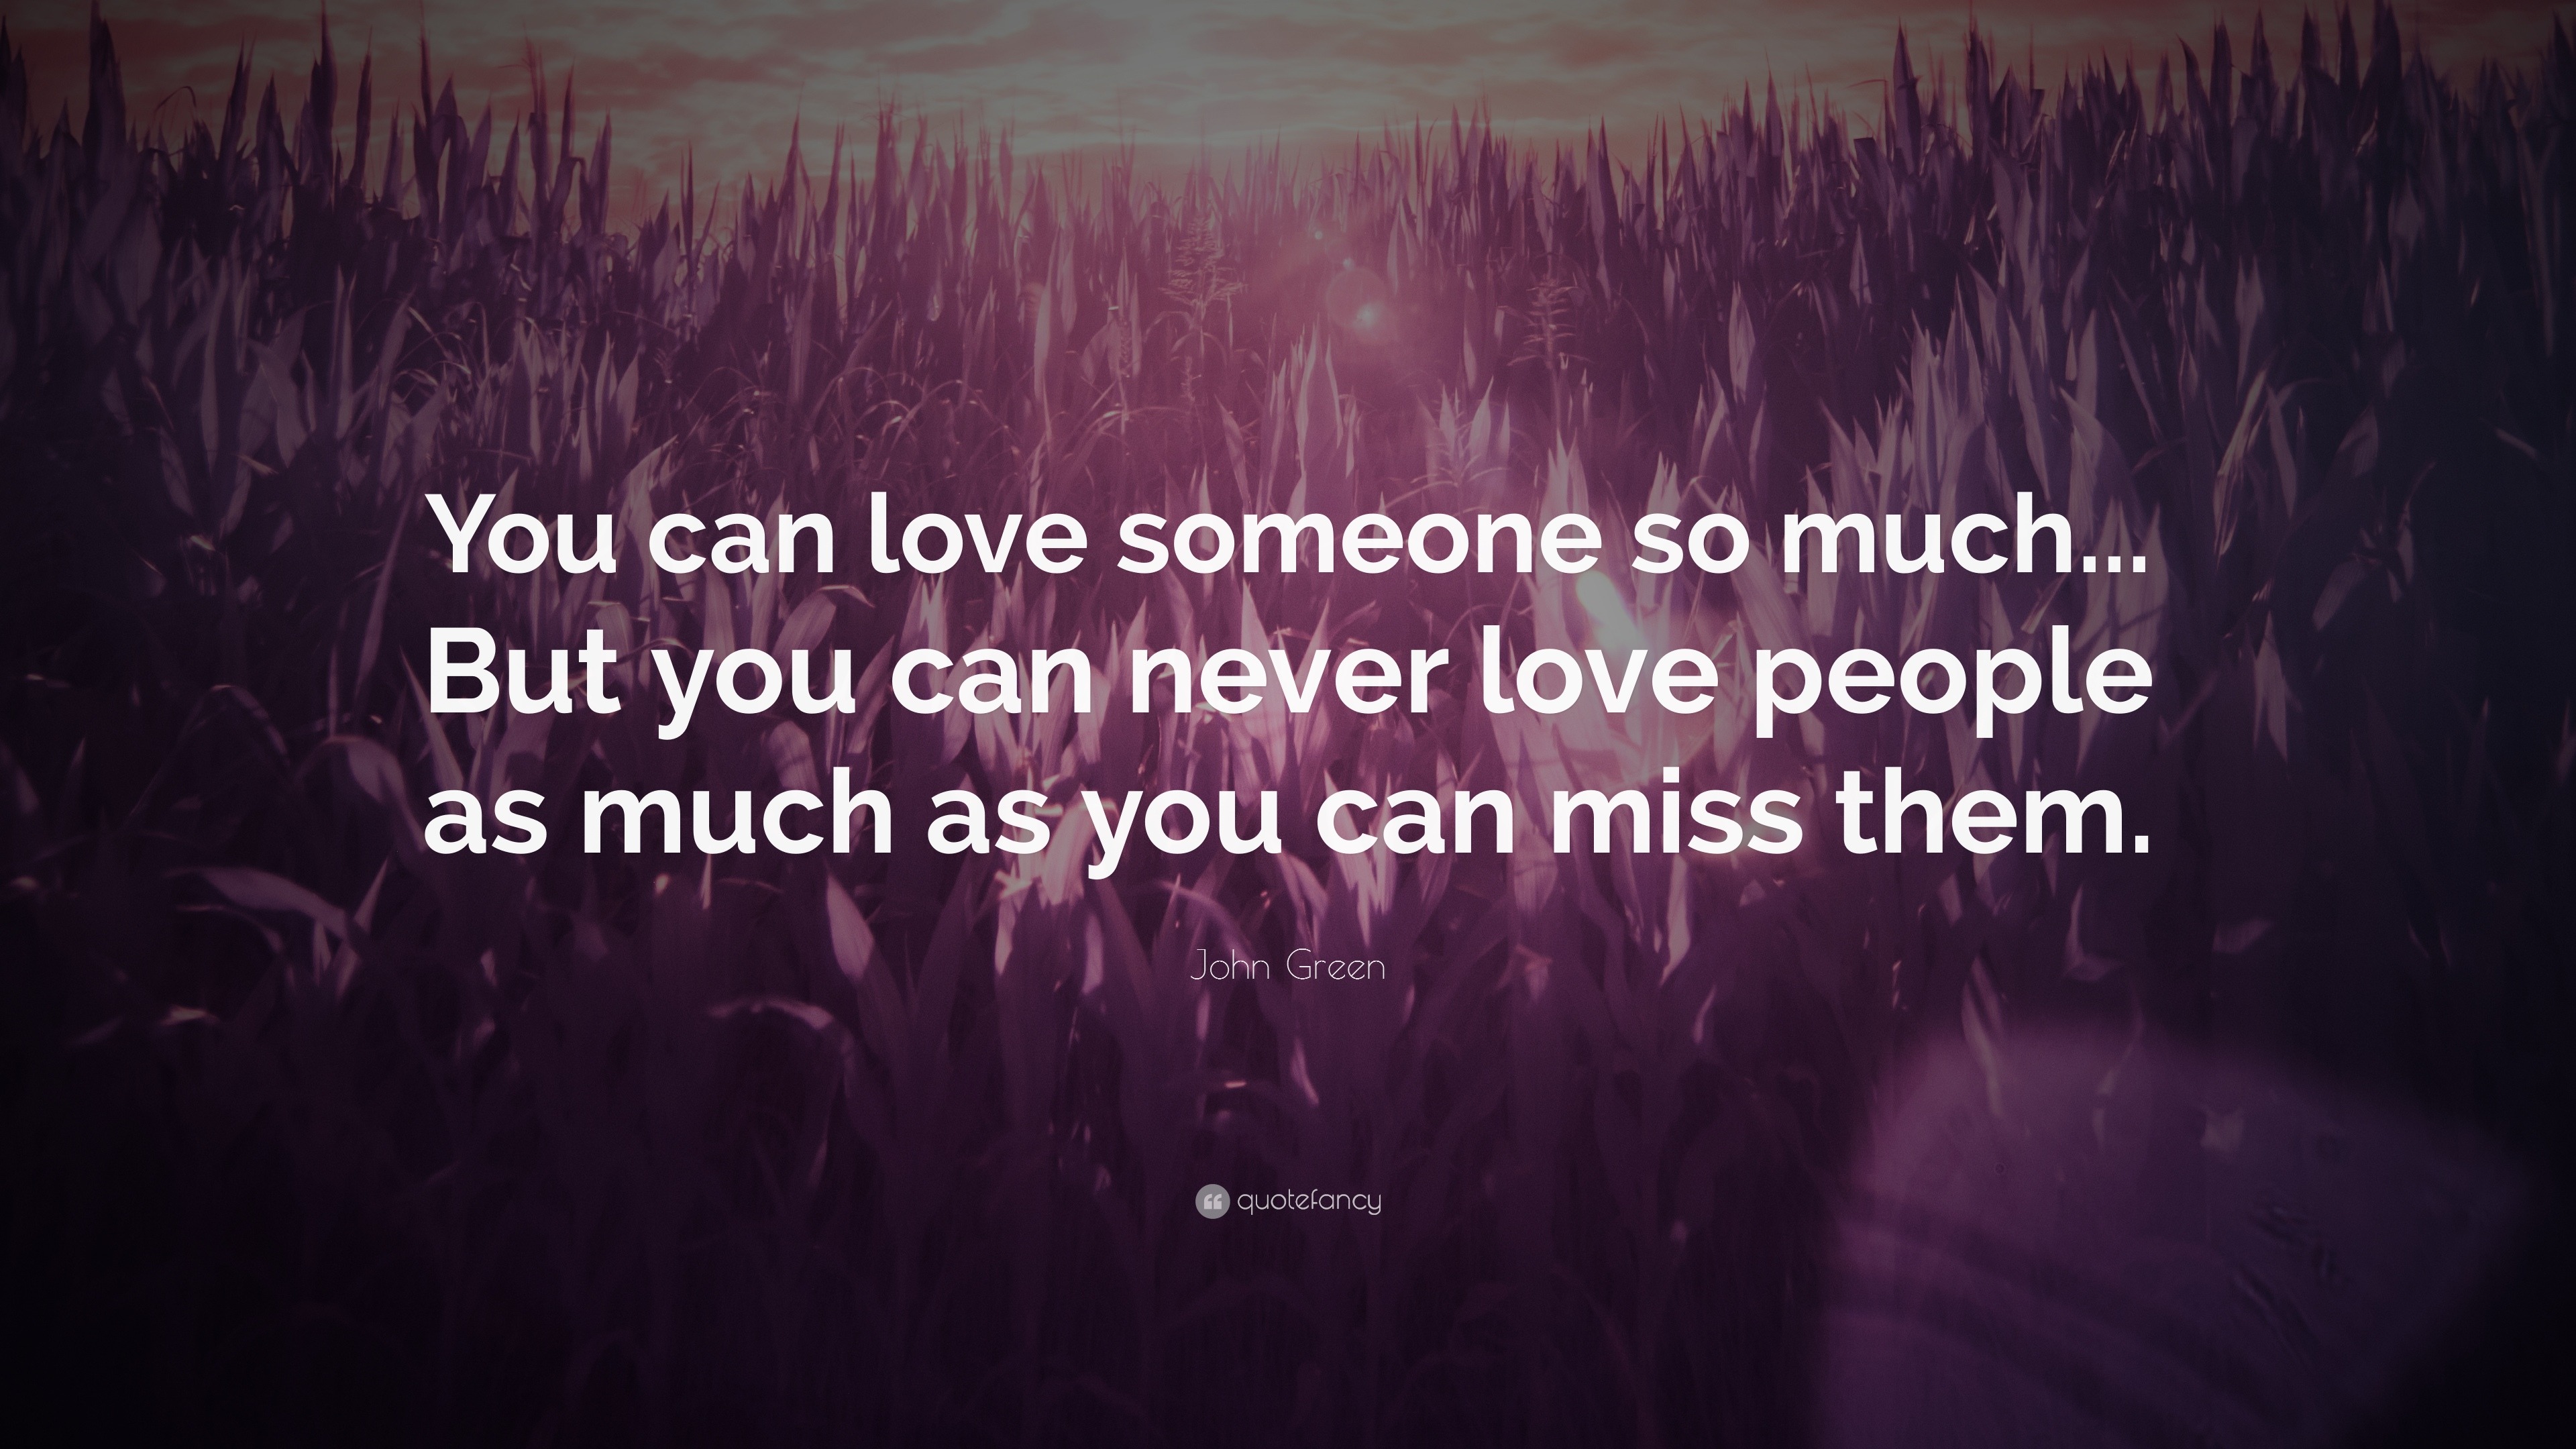 how can you love someone so much quotes